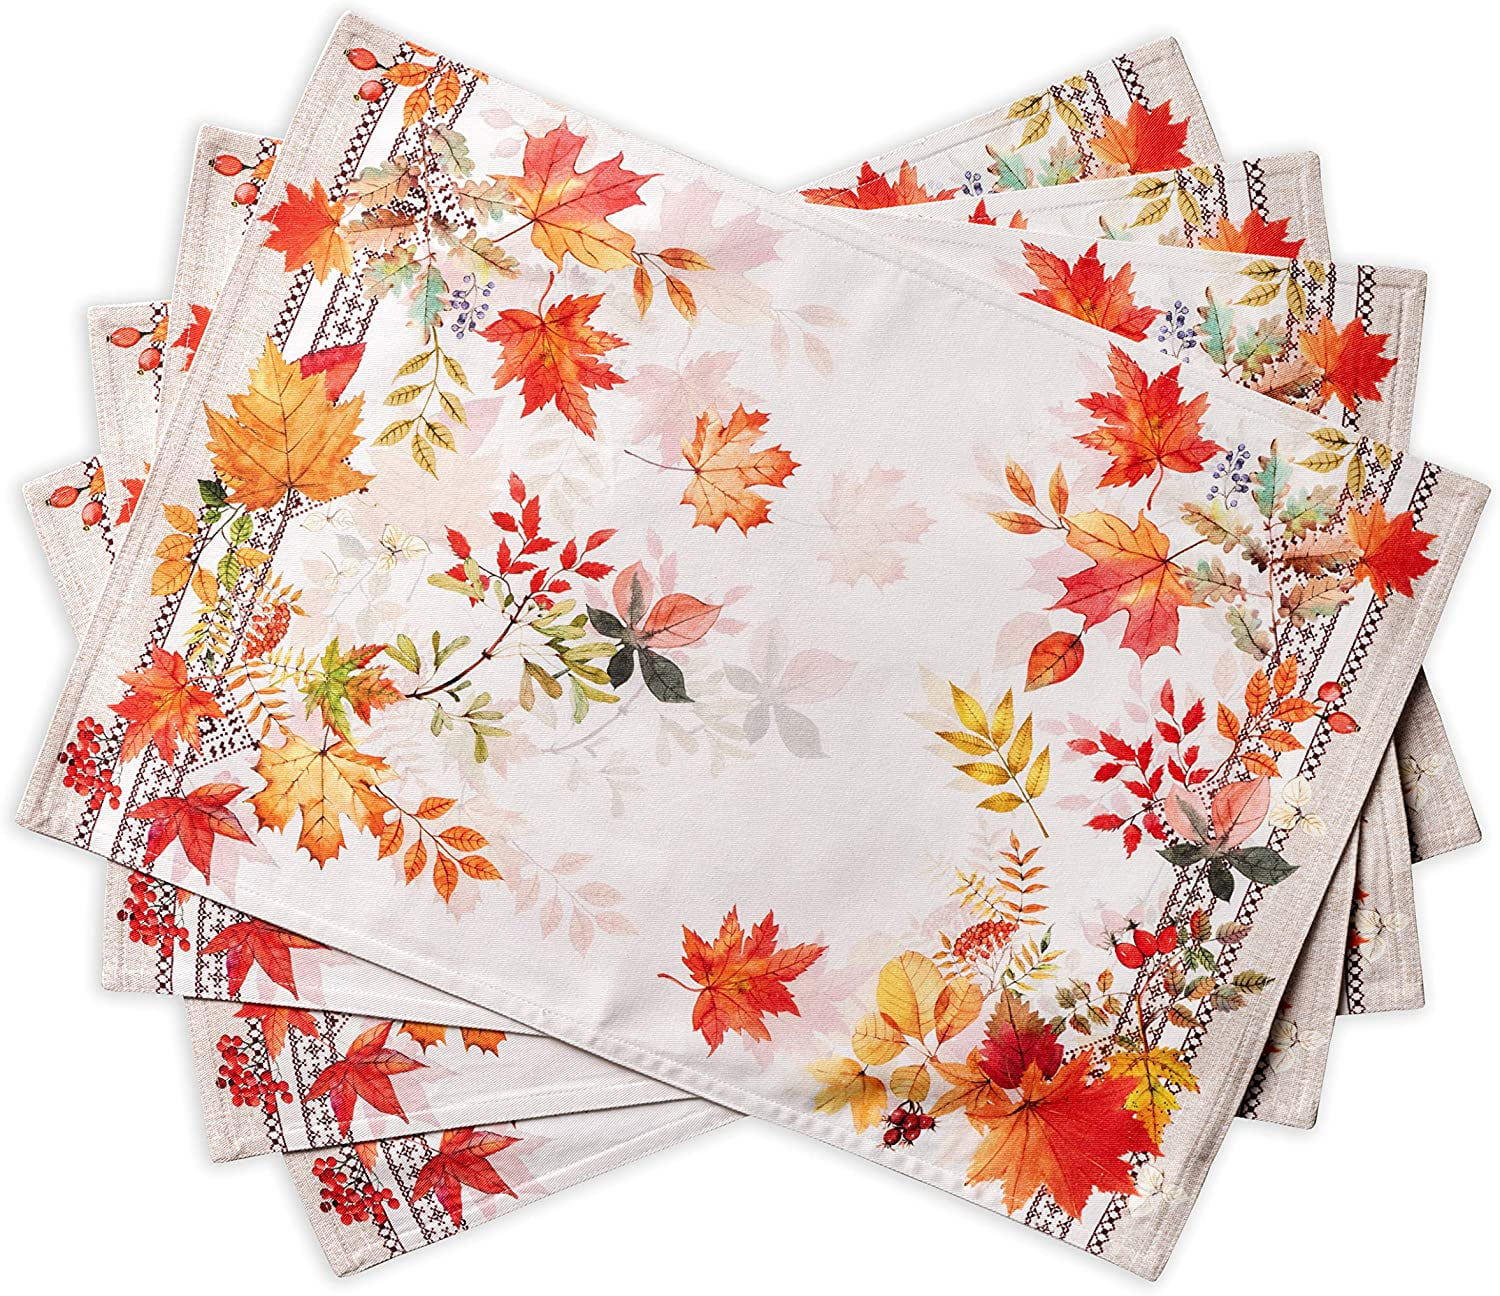 Maison d' Hermine Faisan D' Automne 100% Cotton Set of 4 Placemats for Dining Table Everyday Use Kitchen Wedding Dinner Parties | 13 Inch by 19 Inch